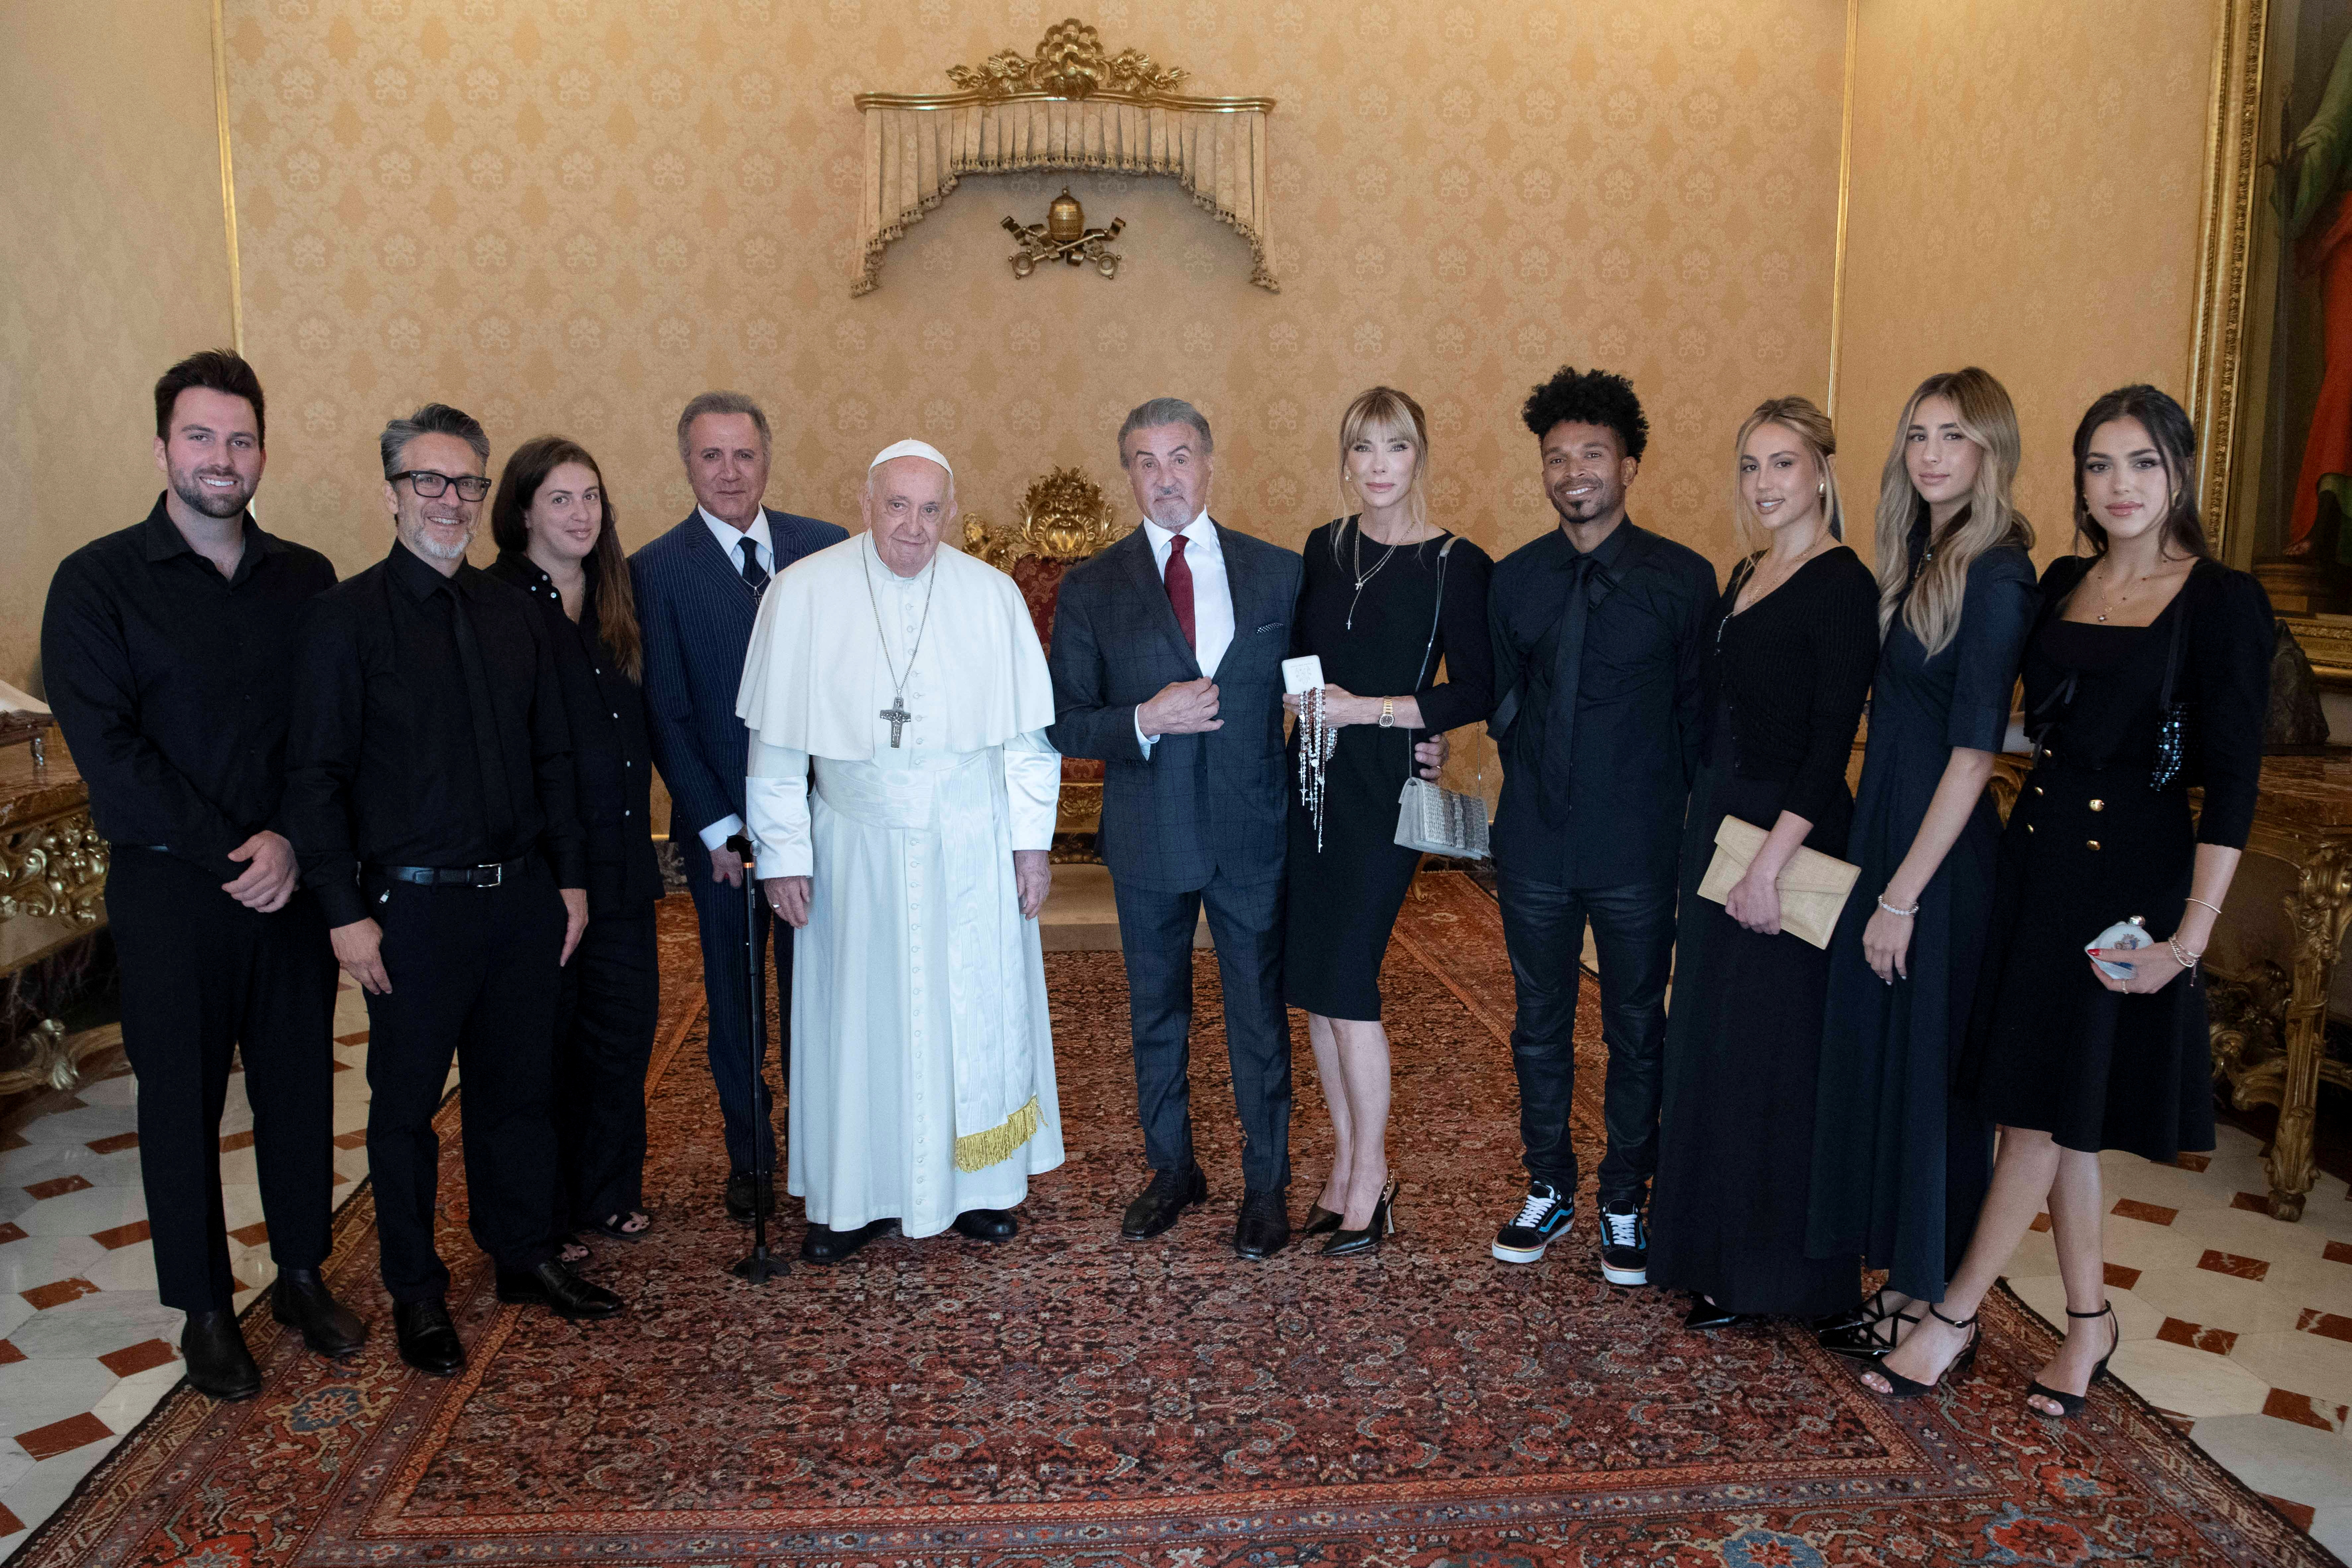 Pope Francis meets actor Sylvester Stallone at the Vatican